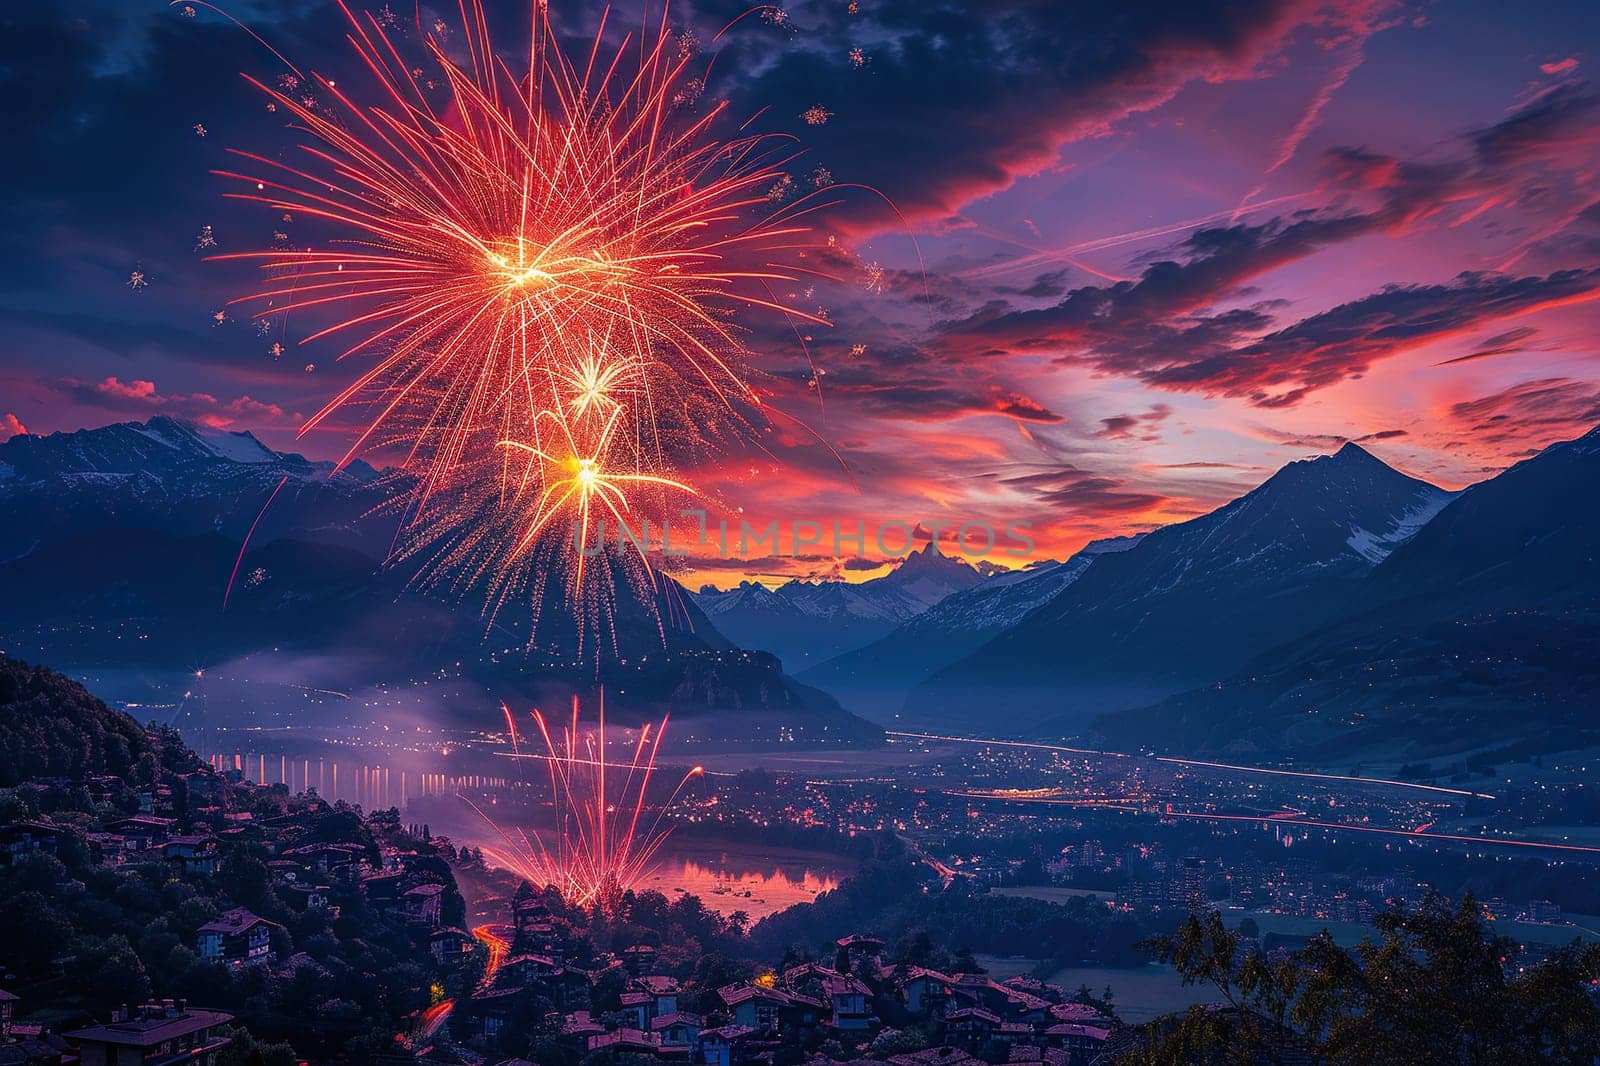 Colorful fireworks over the city and river in the mountains. Holiday celebration background.